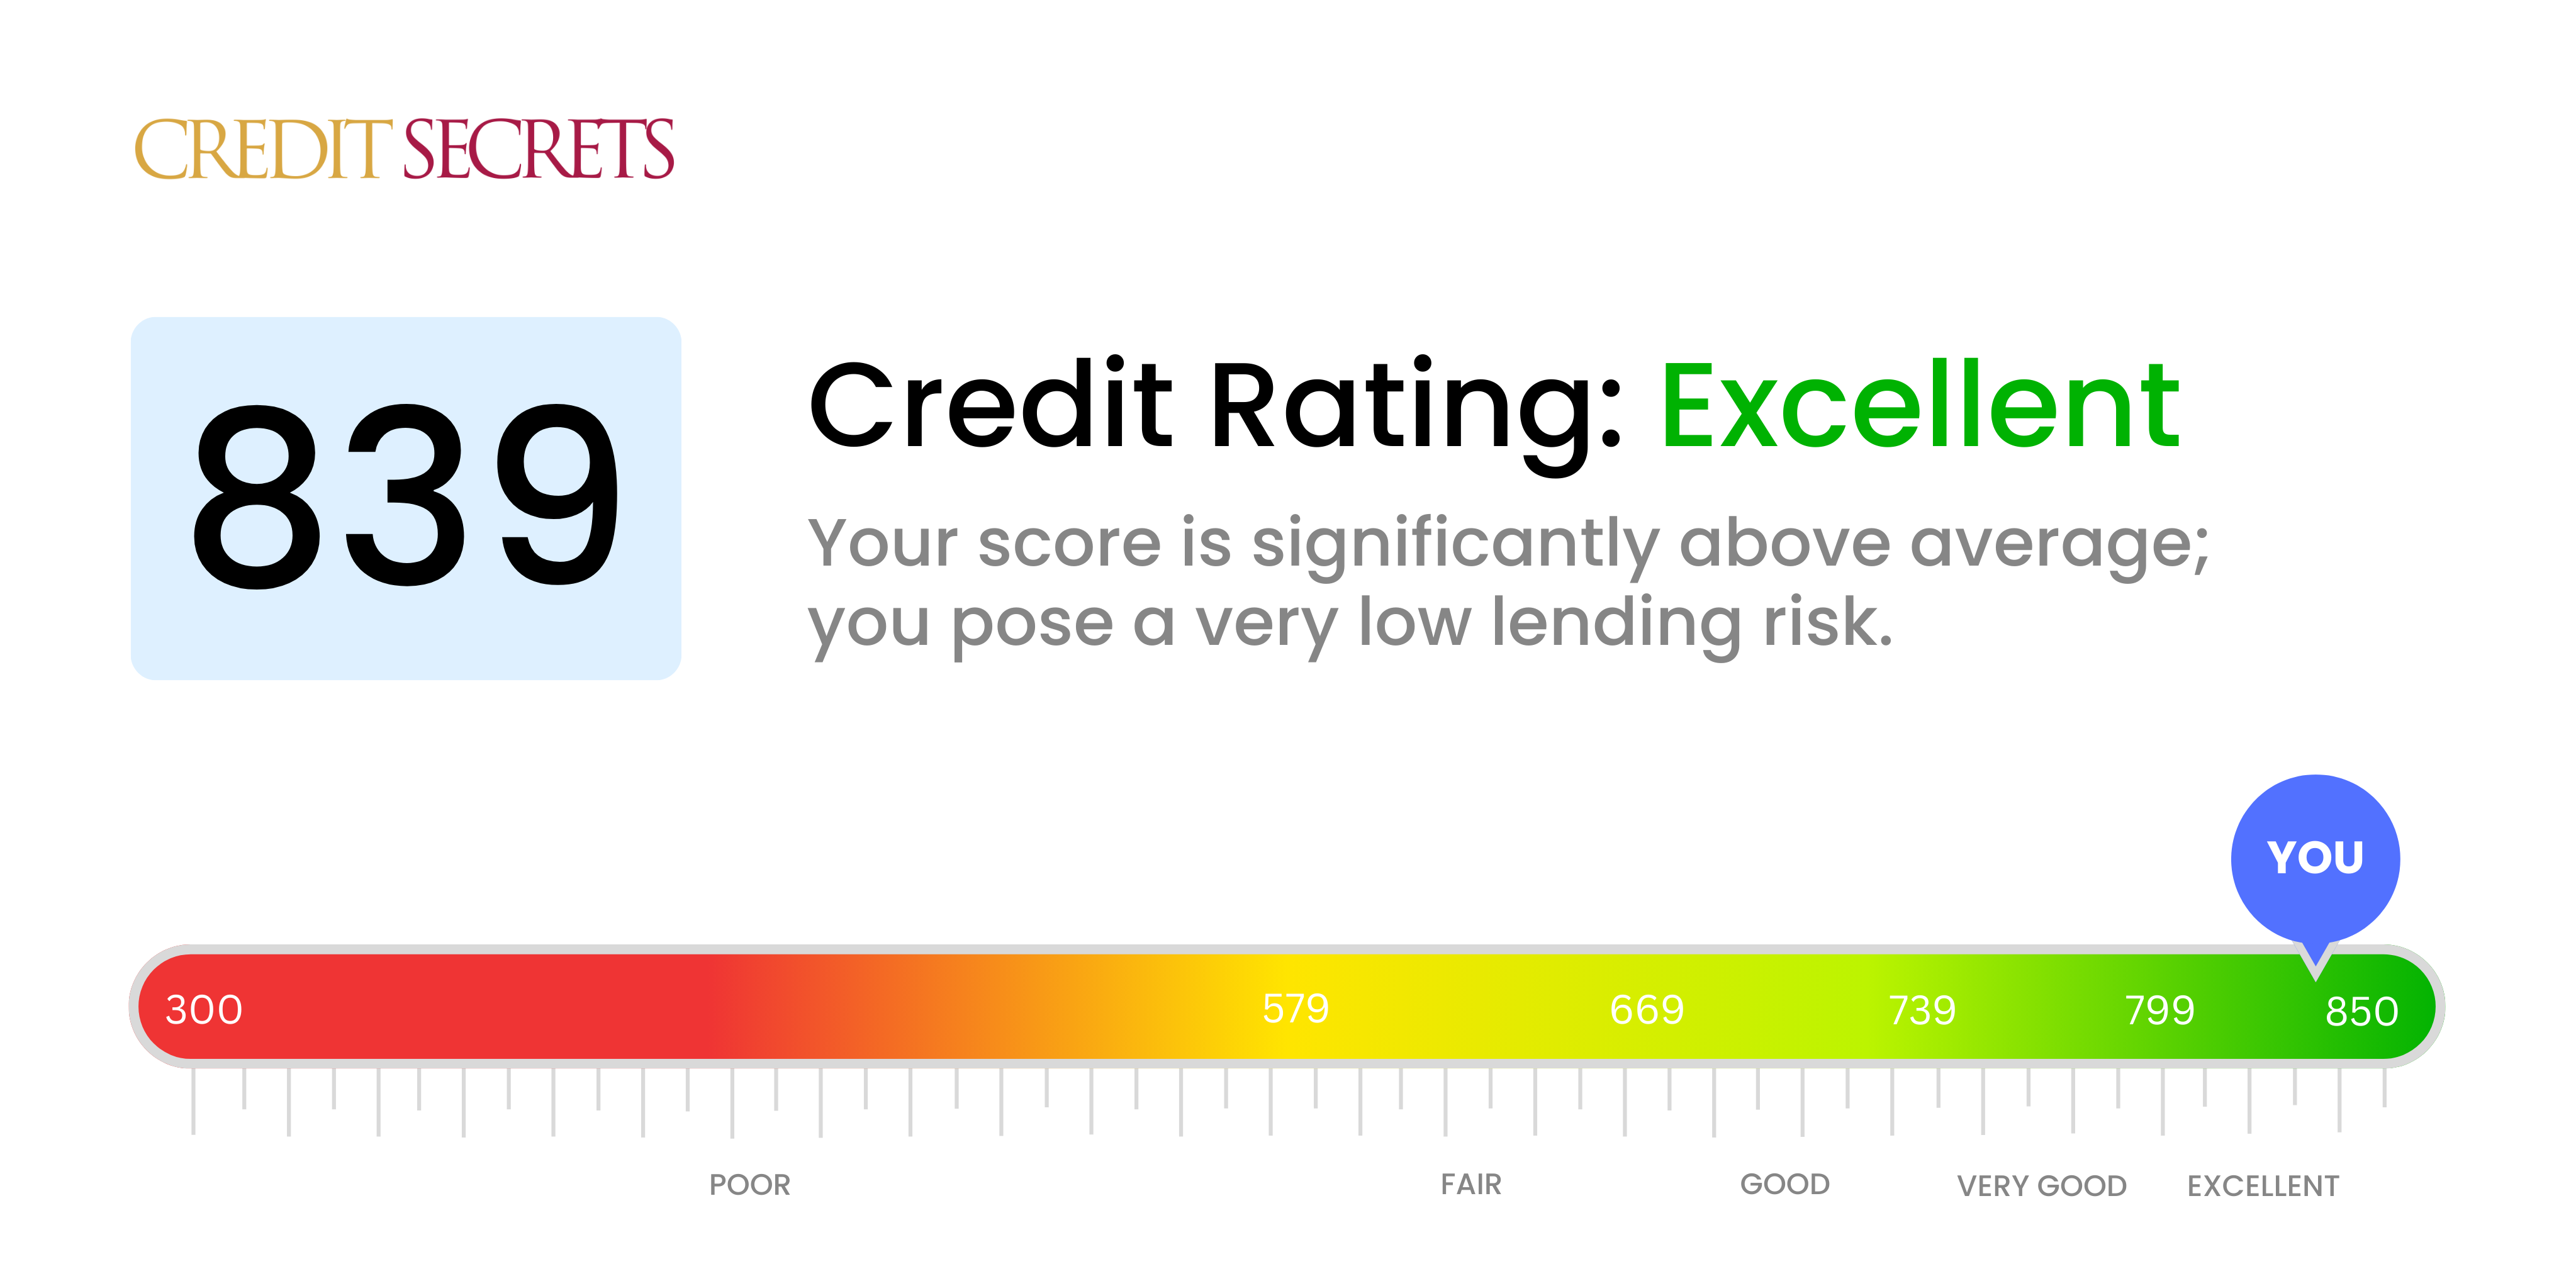 Is 839 a good credit score?